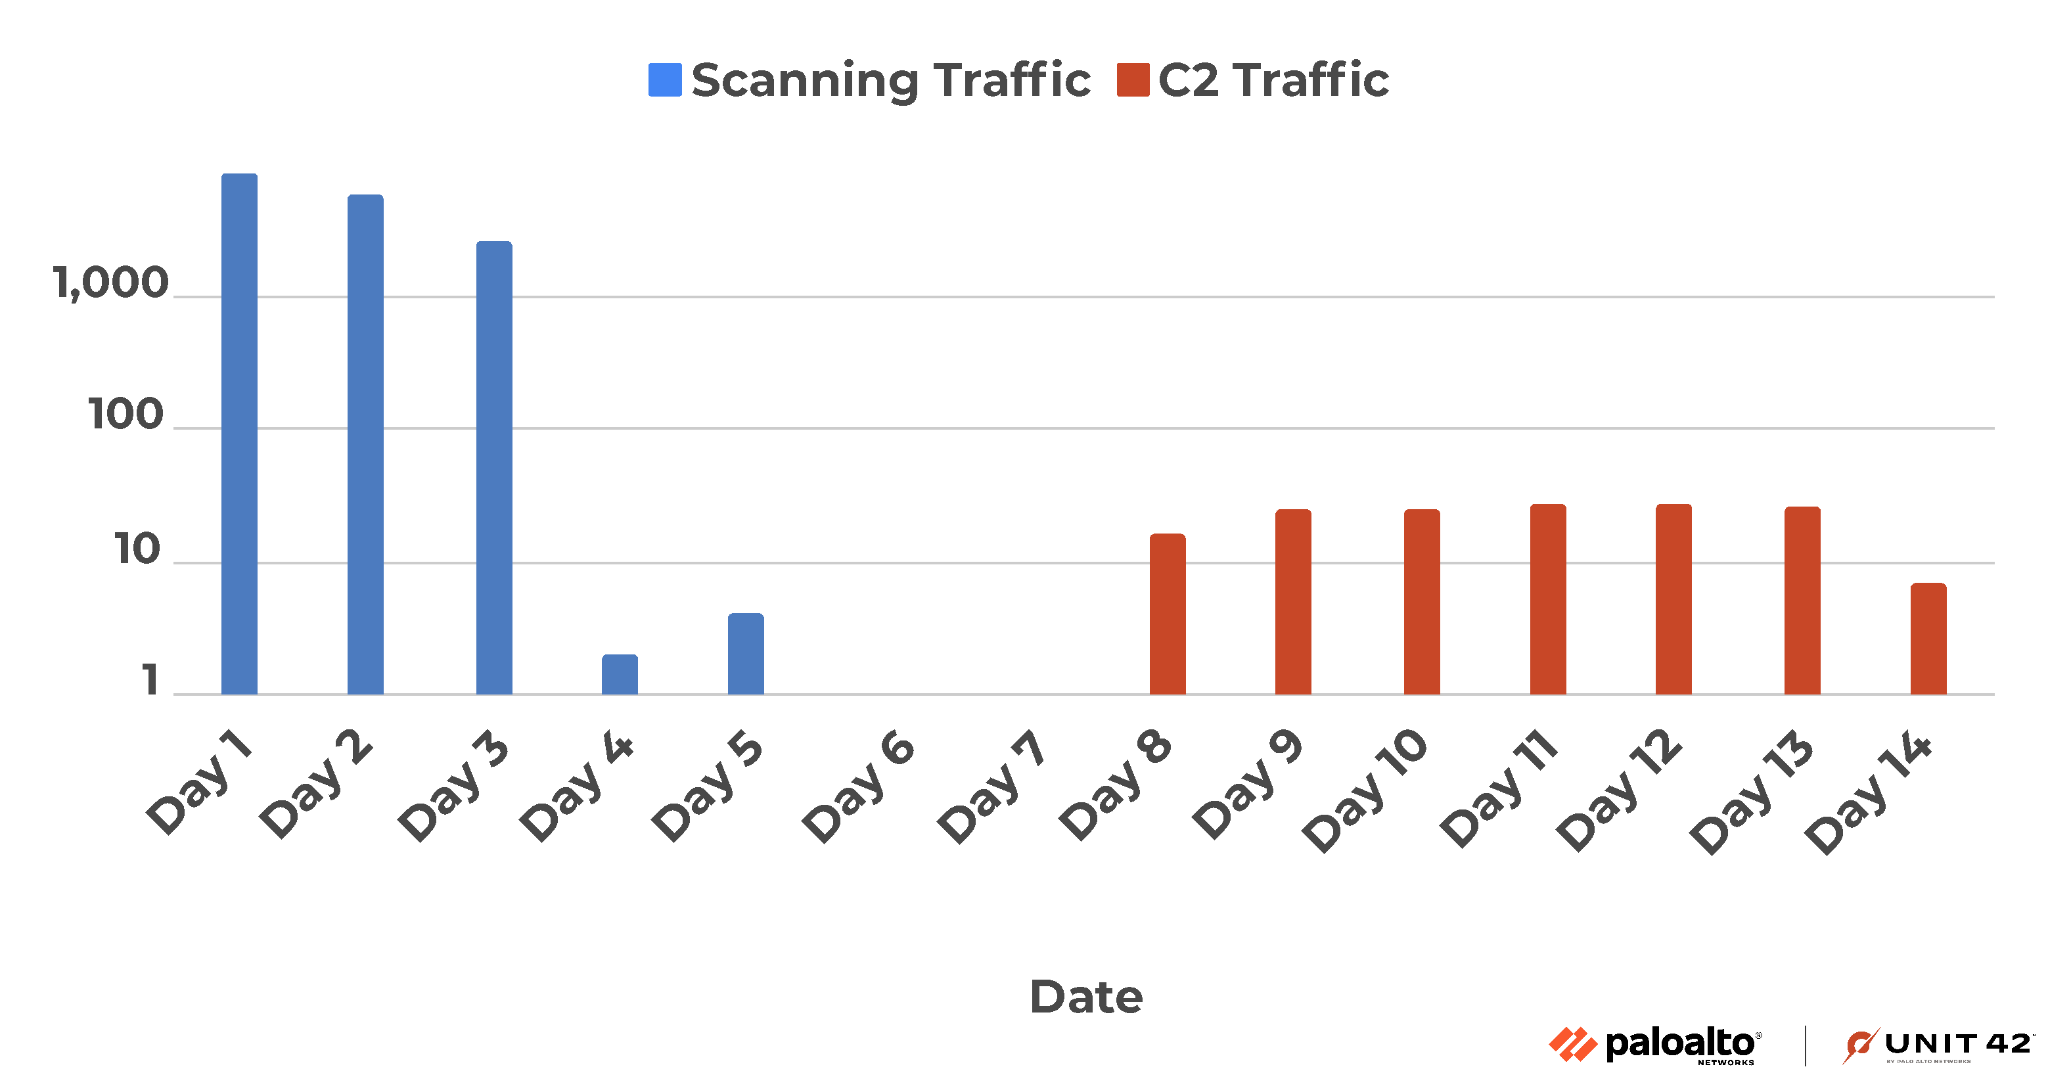 Image 2 is a trend graph of scanning traffic compared to command and control traffic for a victim device. The timeline starts on July 6, 2023 and ends on July 23, 2023.